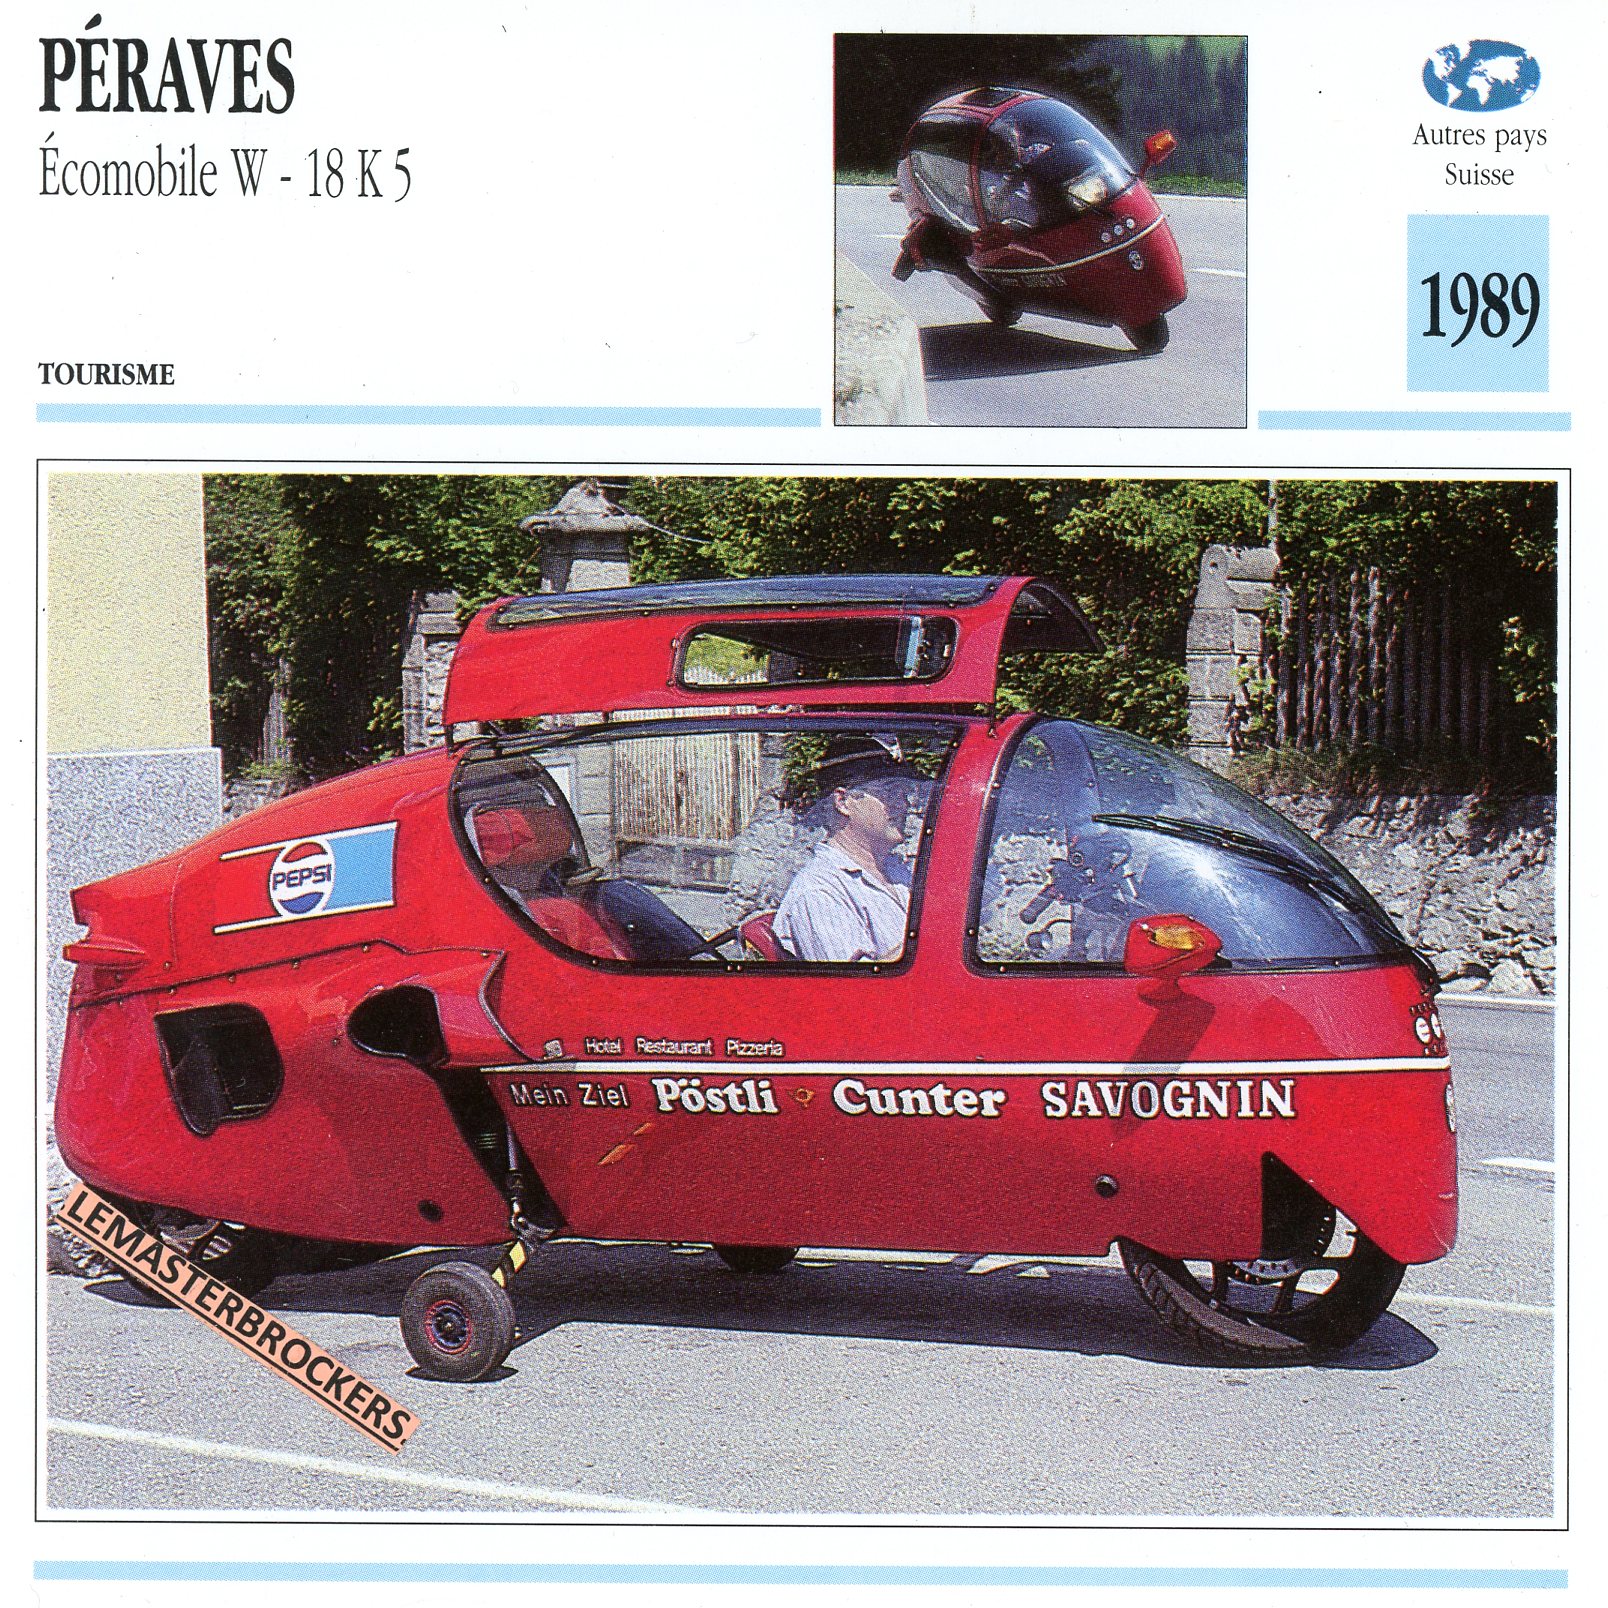 FICHE-MOTO-PÉRAVES-ECOMOBILE-1989-LEMASTERBROCKERS-CARD-MOTORCYCLE